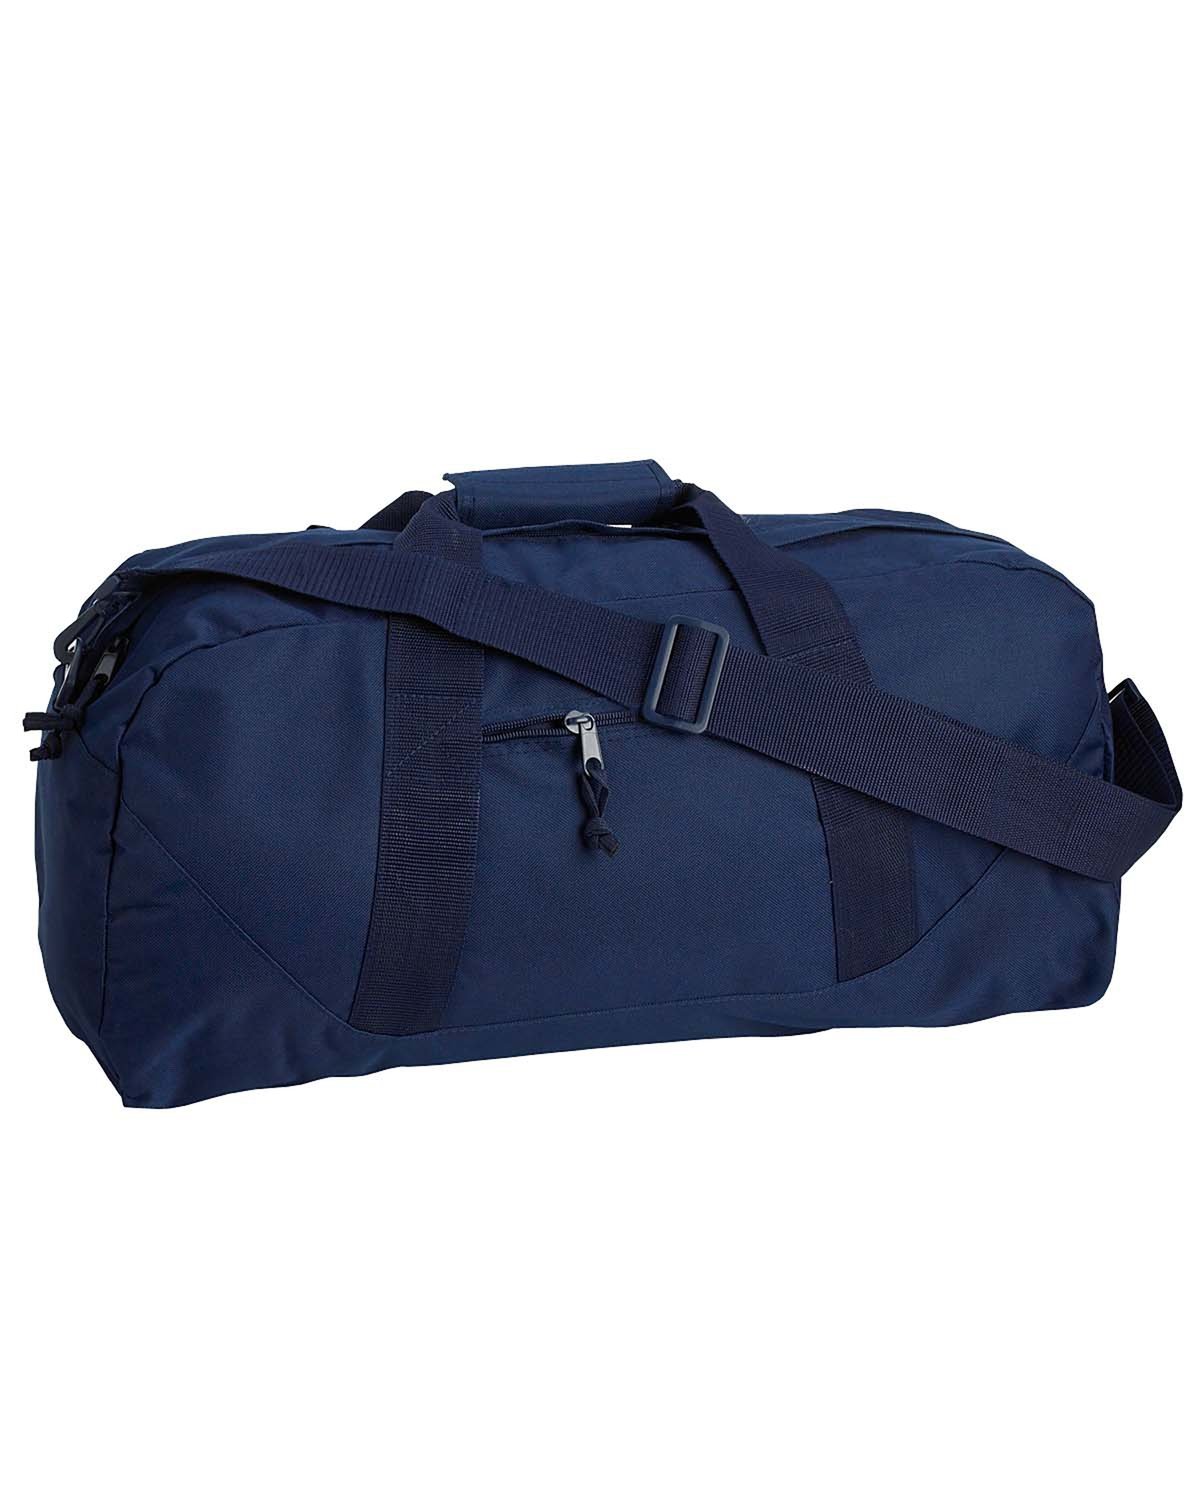 Personalized Duffle Go Bag